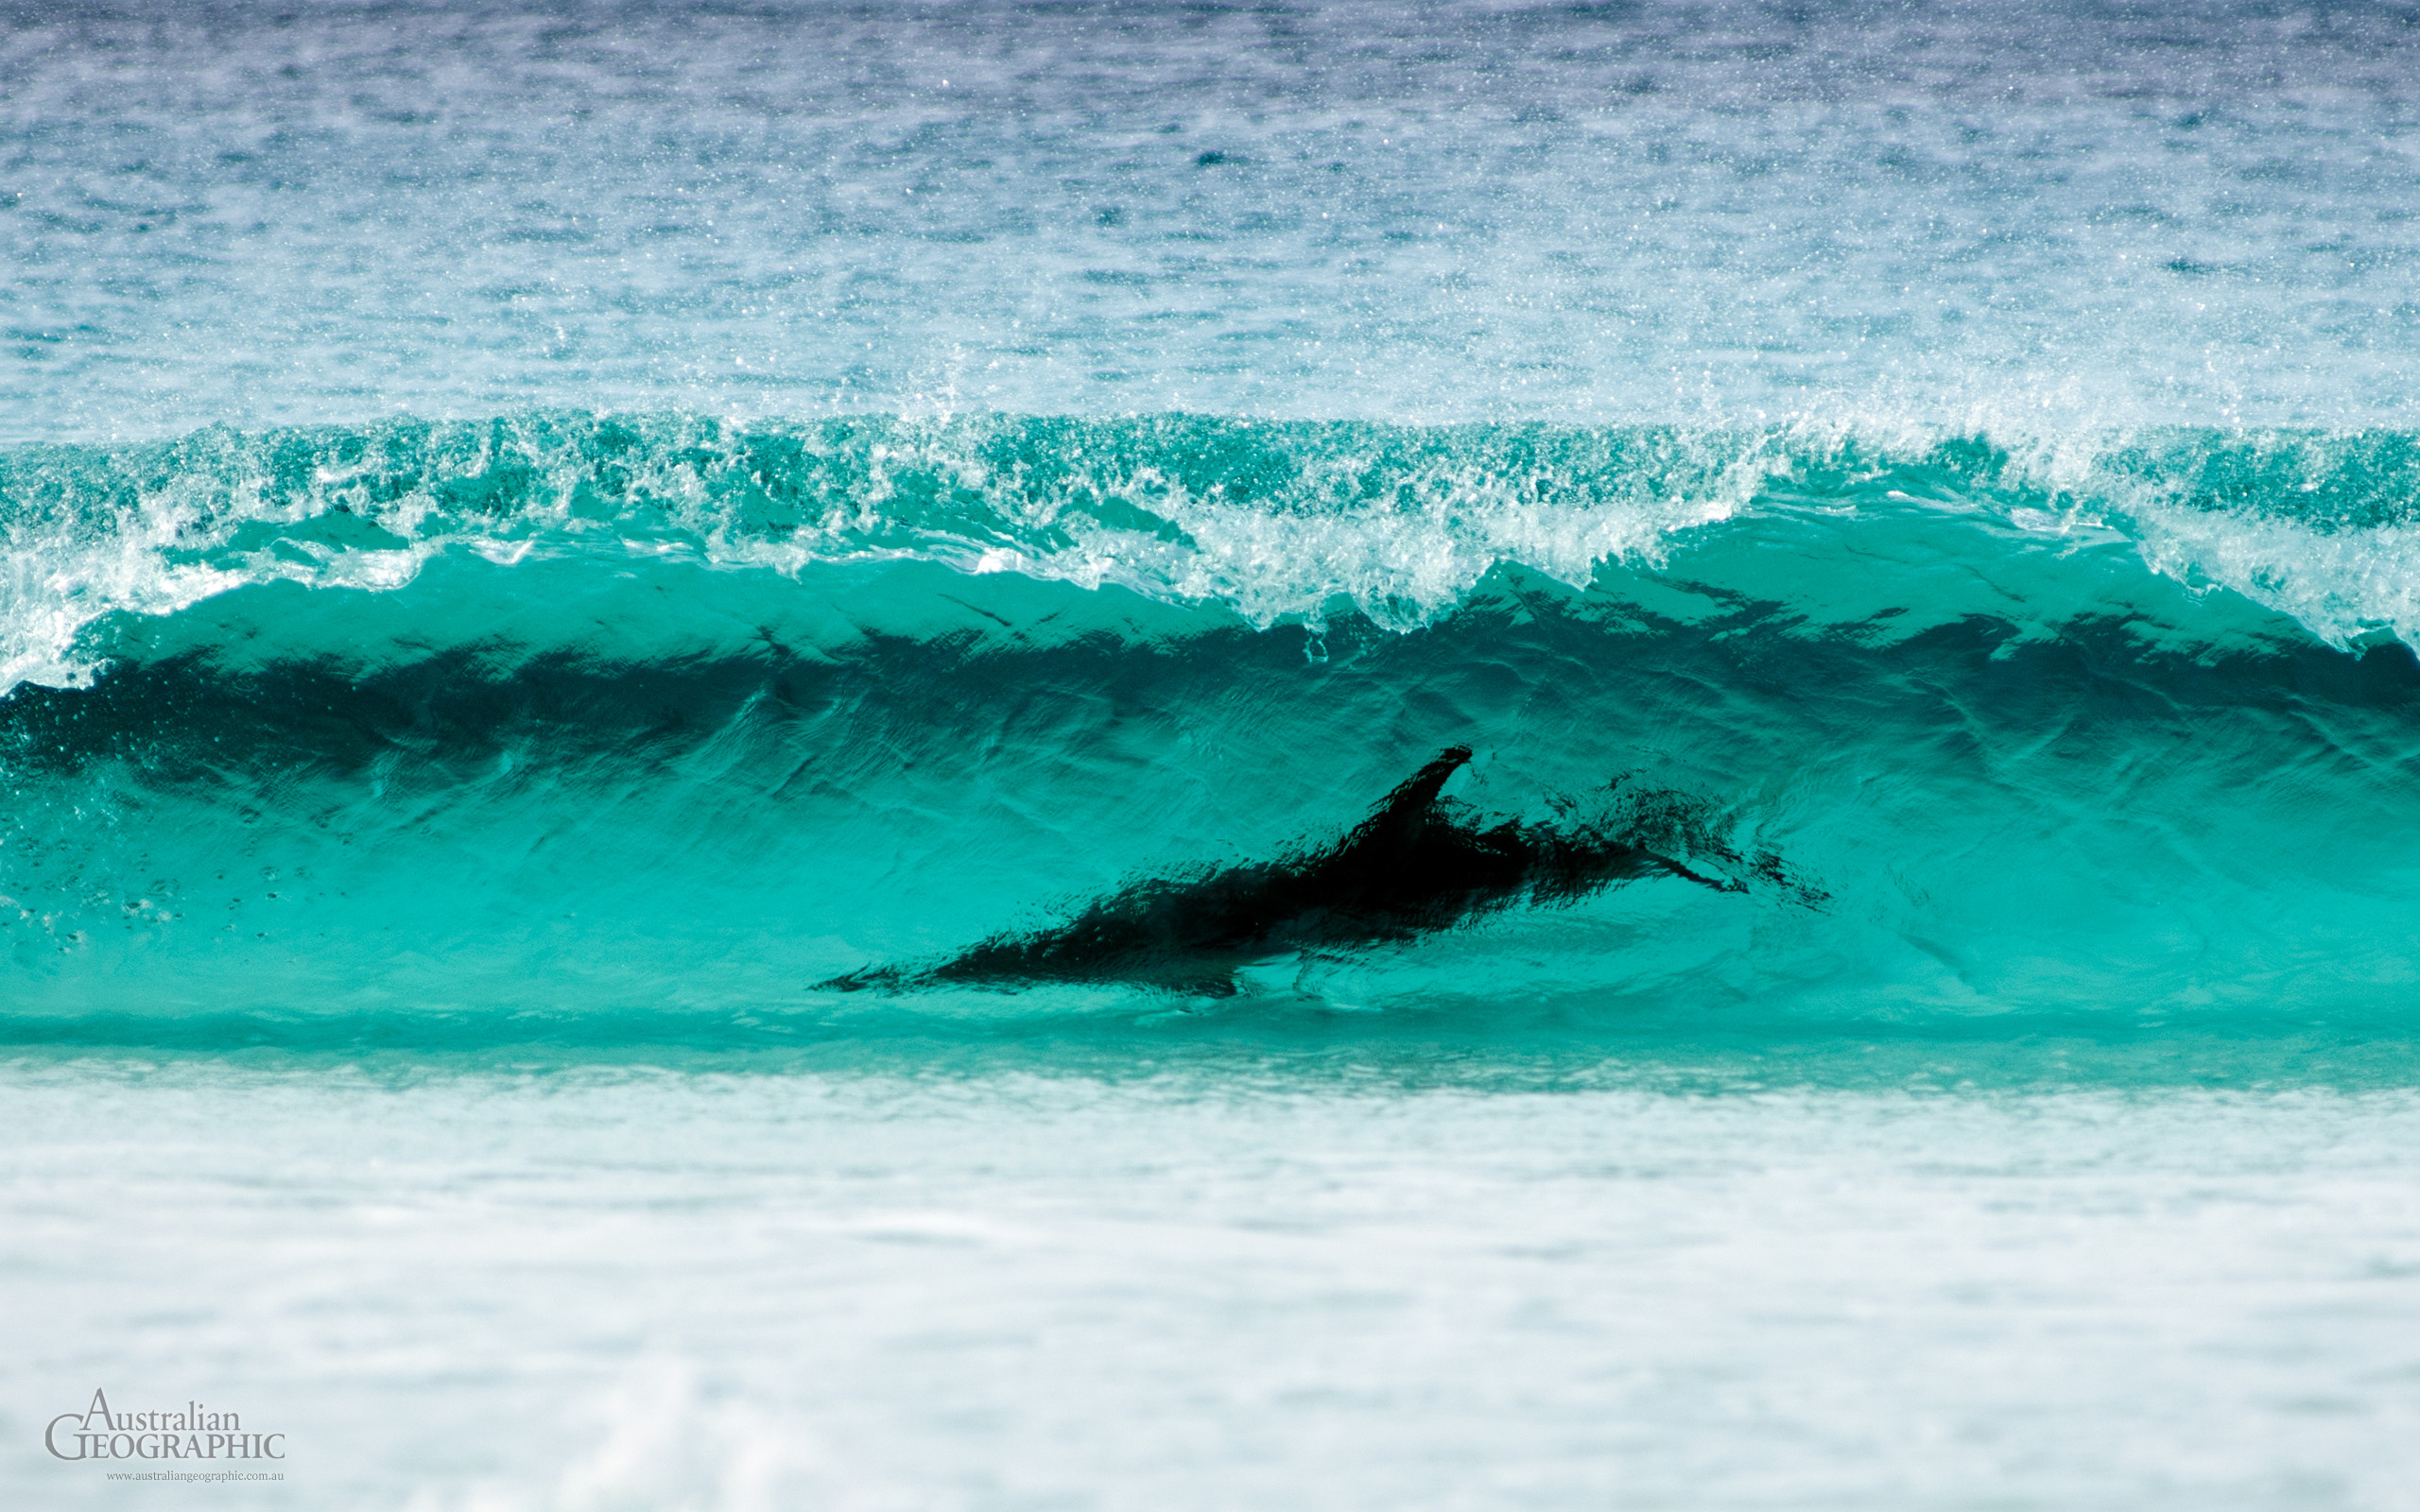 2560x1600 Wallpapers. Images of Australia: Surfing dolphin, Cape Le Grand NP, Western  Australia